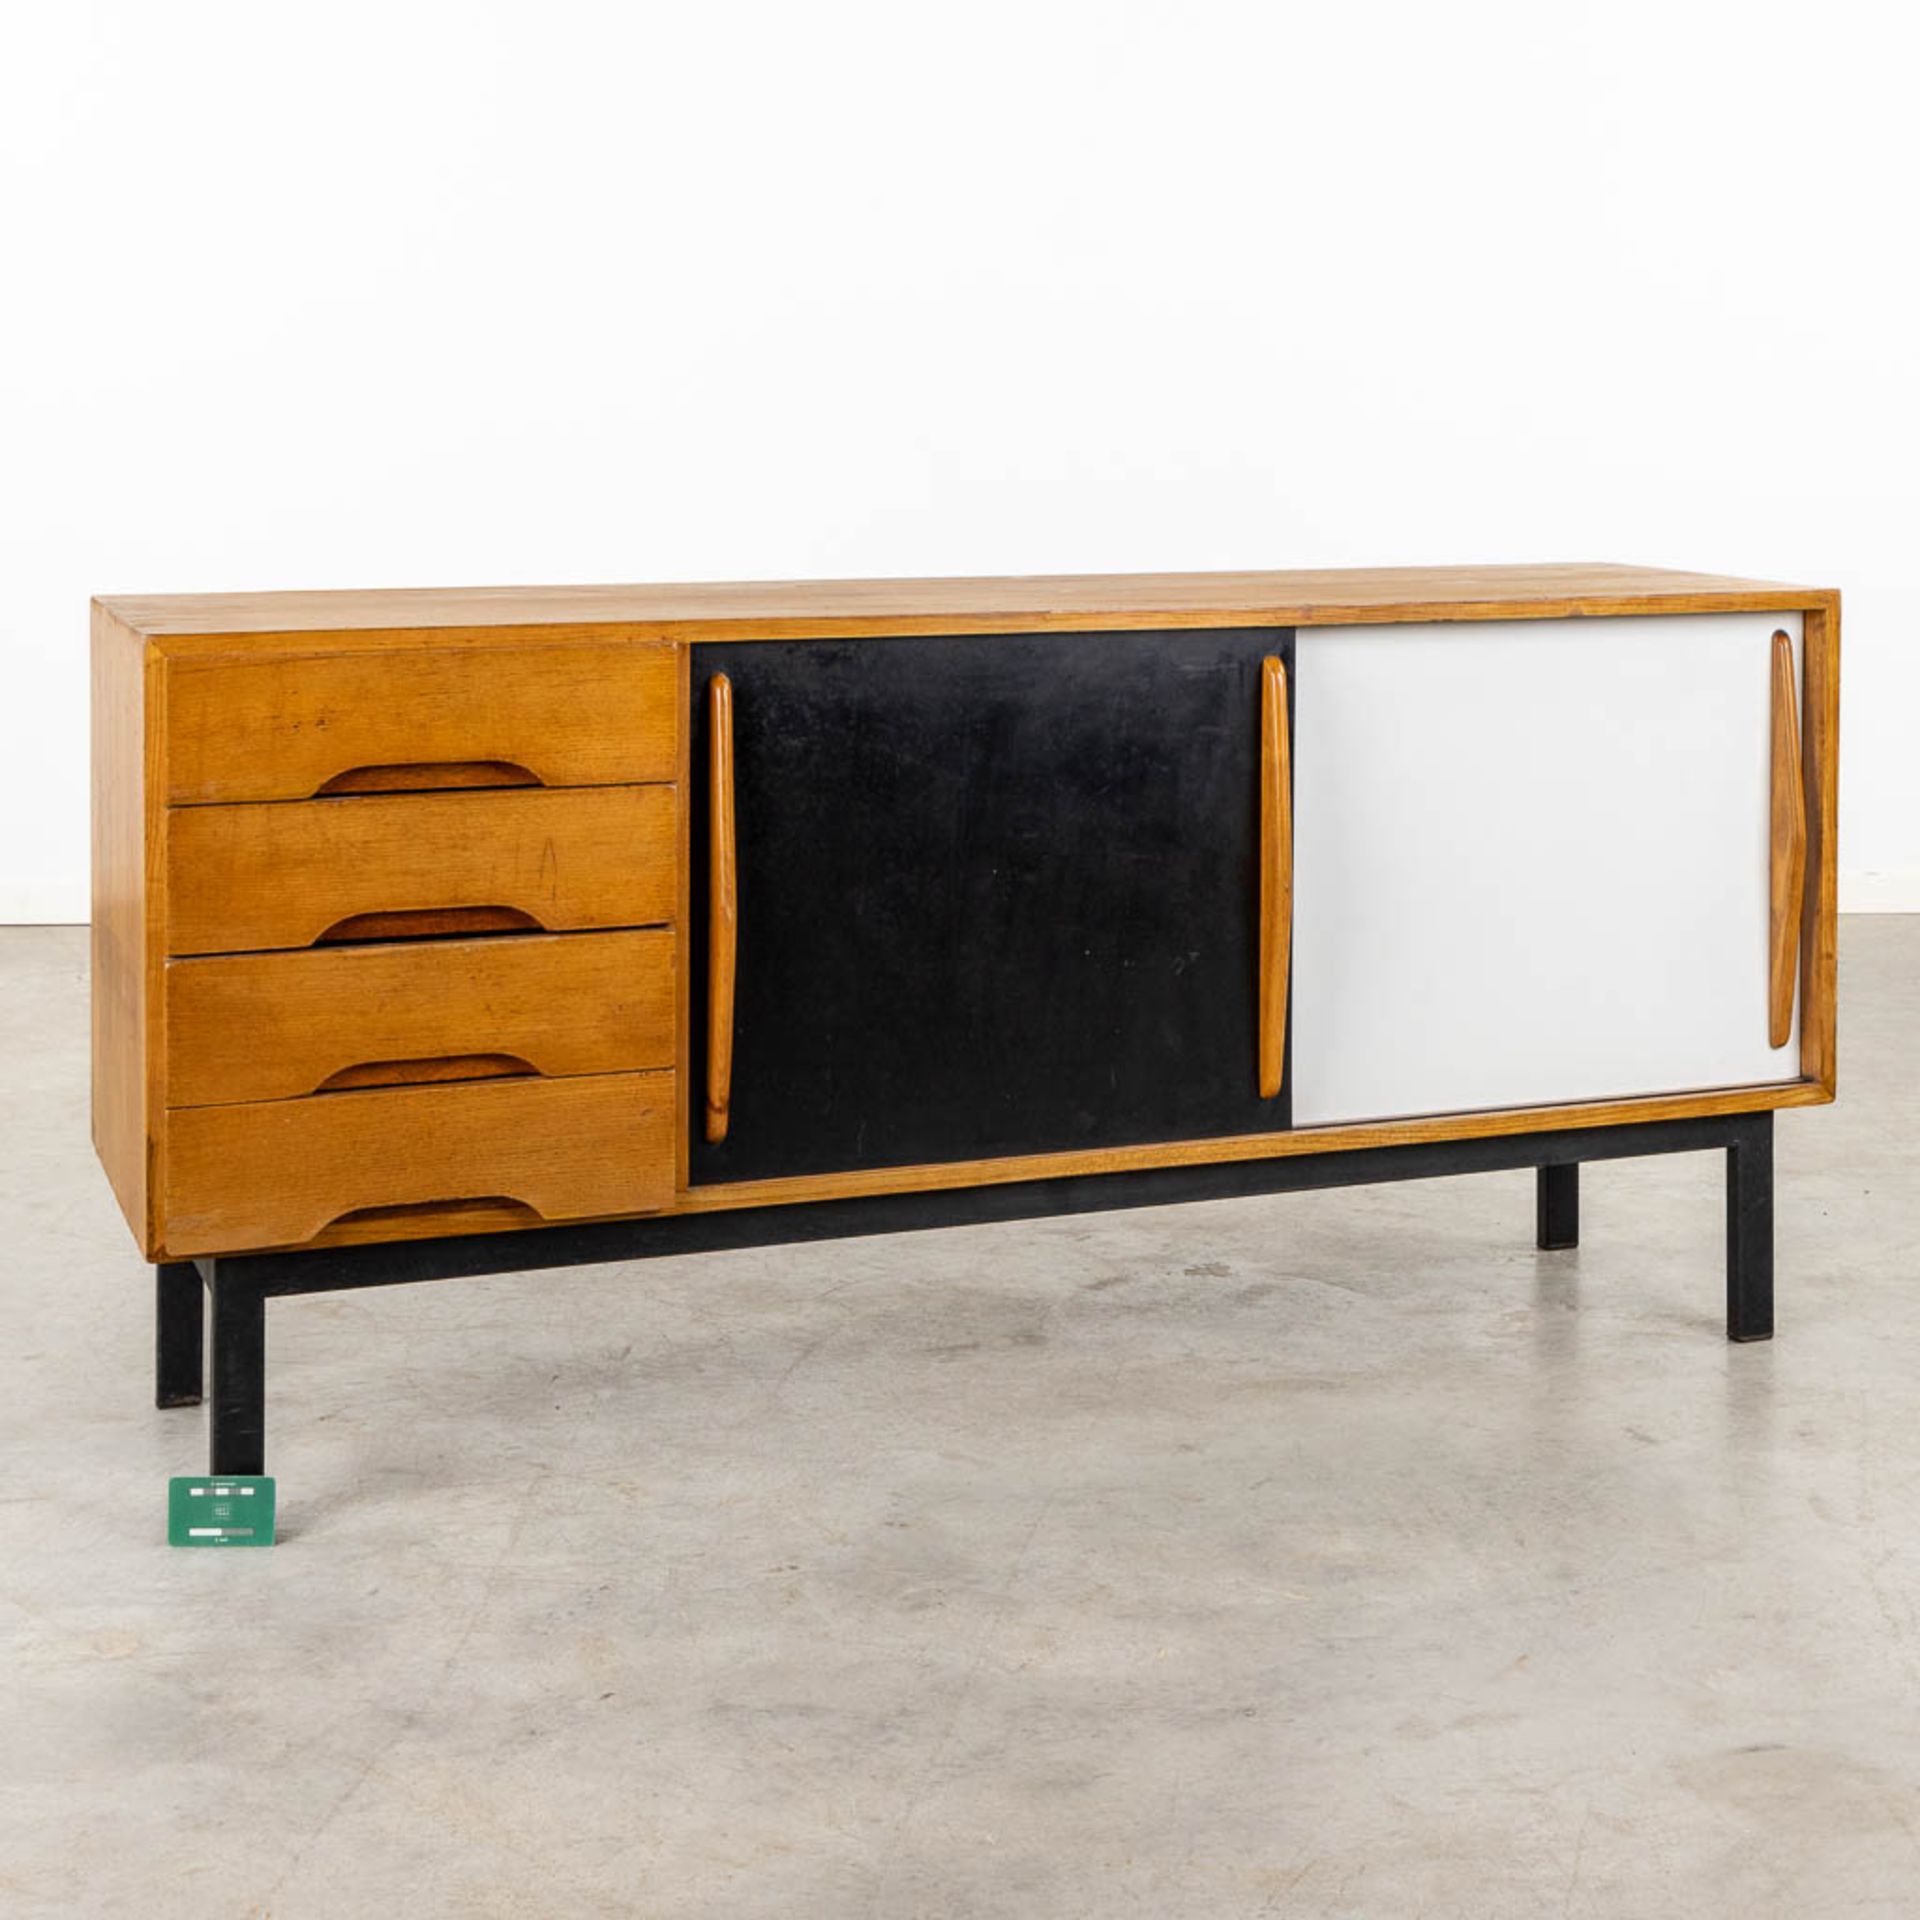 Charlotte PERRIAND (1903-1999) 'Cansado' a sideboard (D:47 x W:158 x H:73 cm) - Image 2 of 16